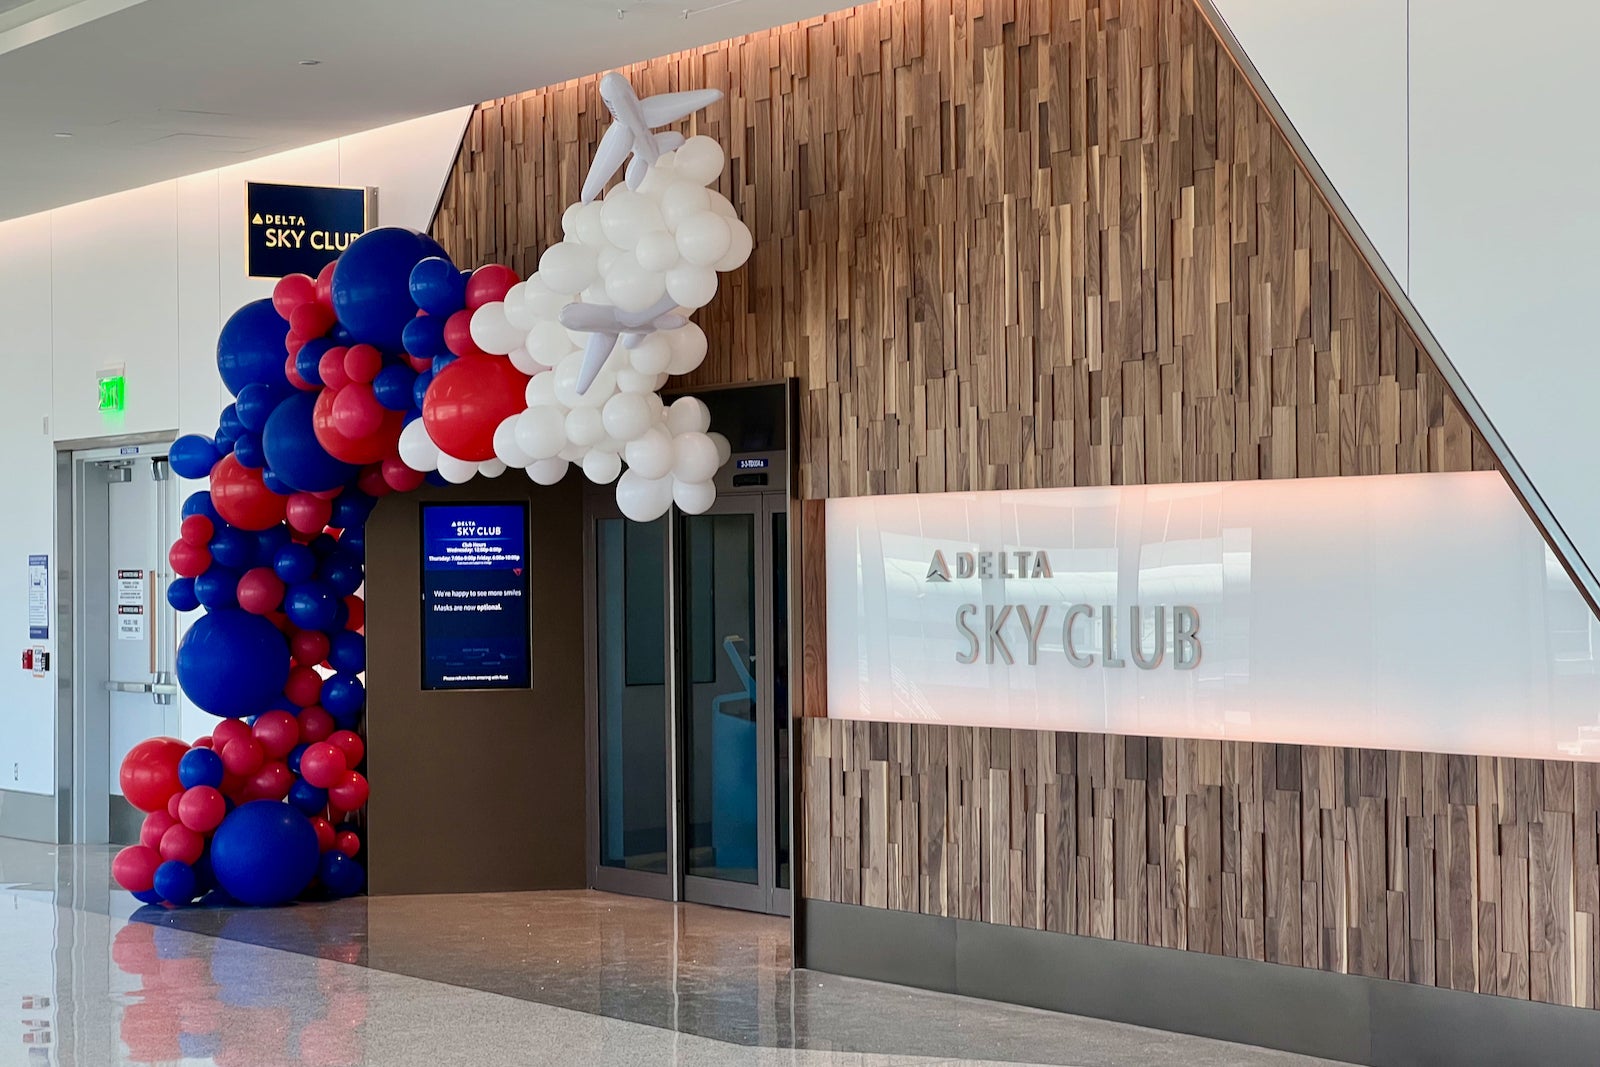 Delta overhauls Sky Club access policy, makes big cuts to reduce overcrowding